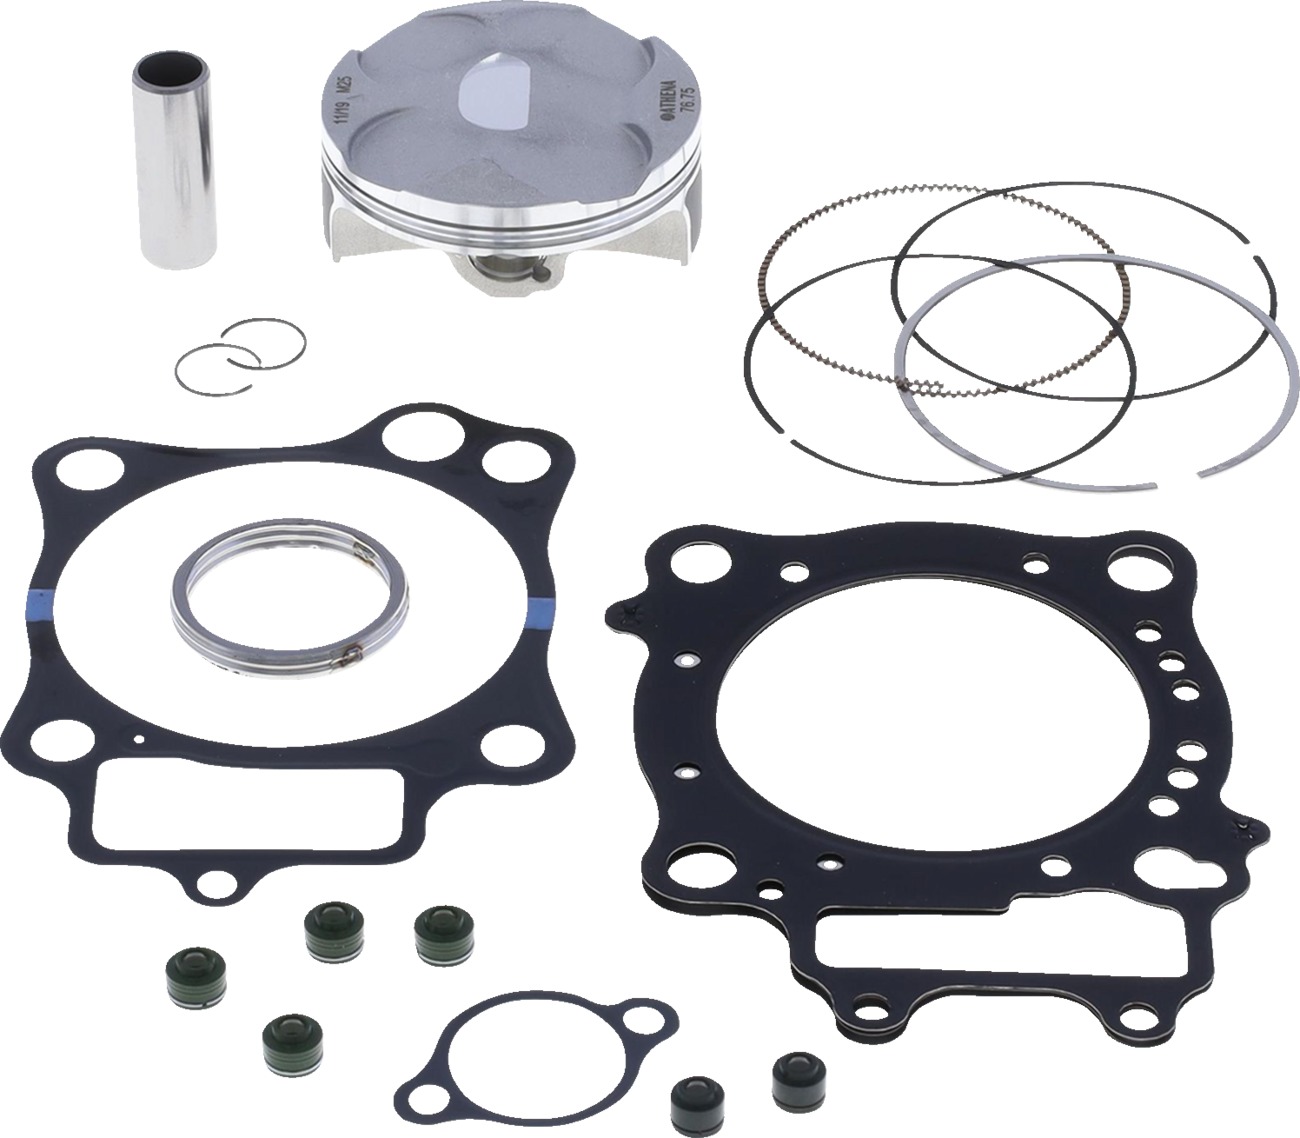 Piston & Top End Gasket Kit 'A' - For 16-17 Honda CRF250R - Click Image to Close